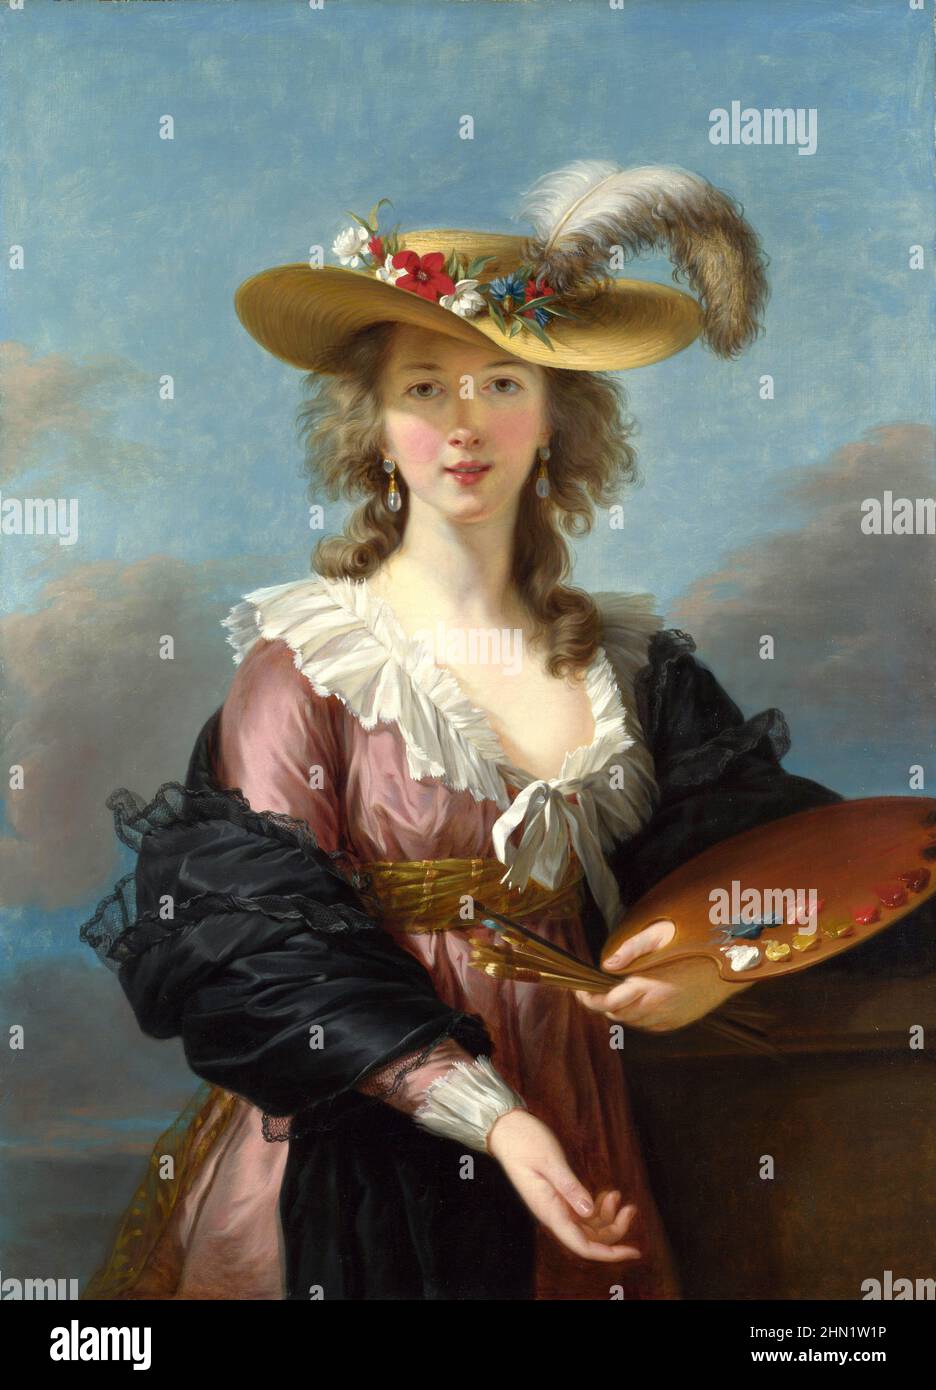 Élisabeth Louise Vigée Le Brun (1755 – 1842) known as Madame Le Brun, a French portrait painter in the late 18th century. Self-portrait in a Straw Hat, 1782 Stock Photo